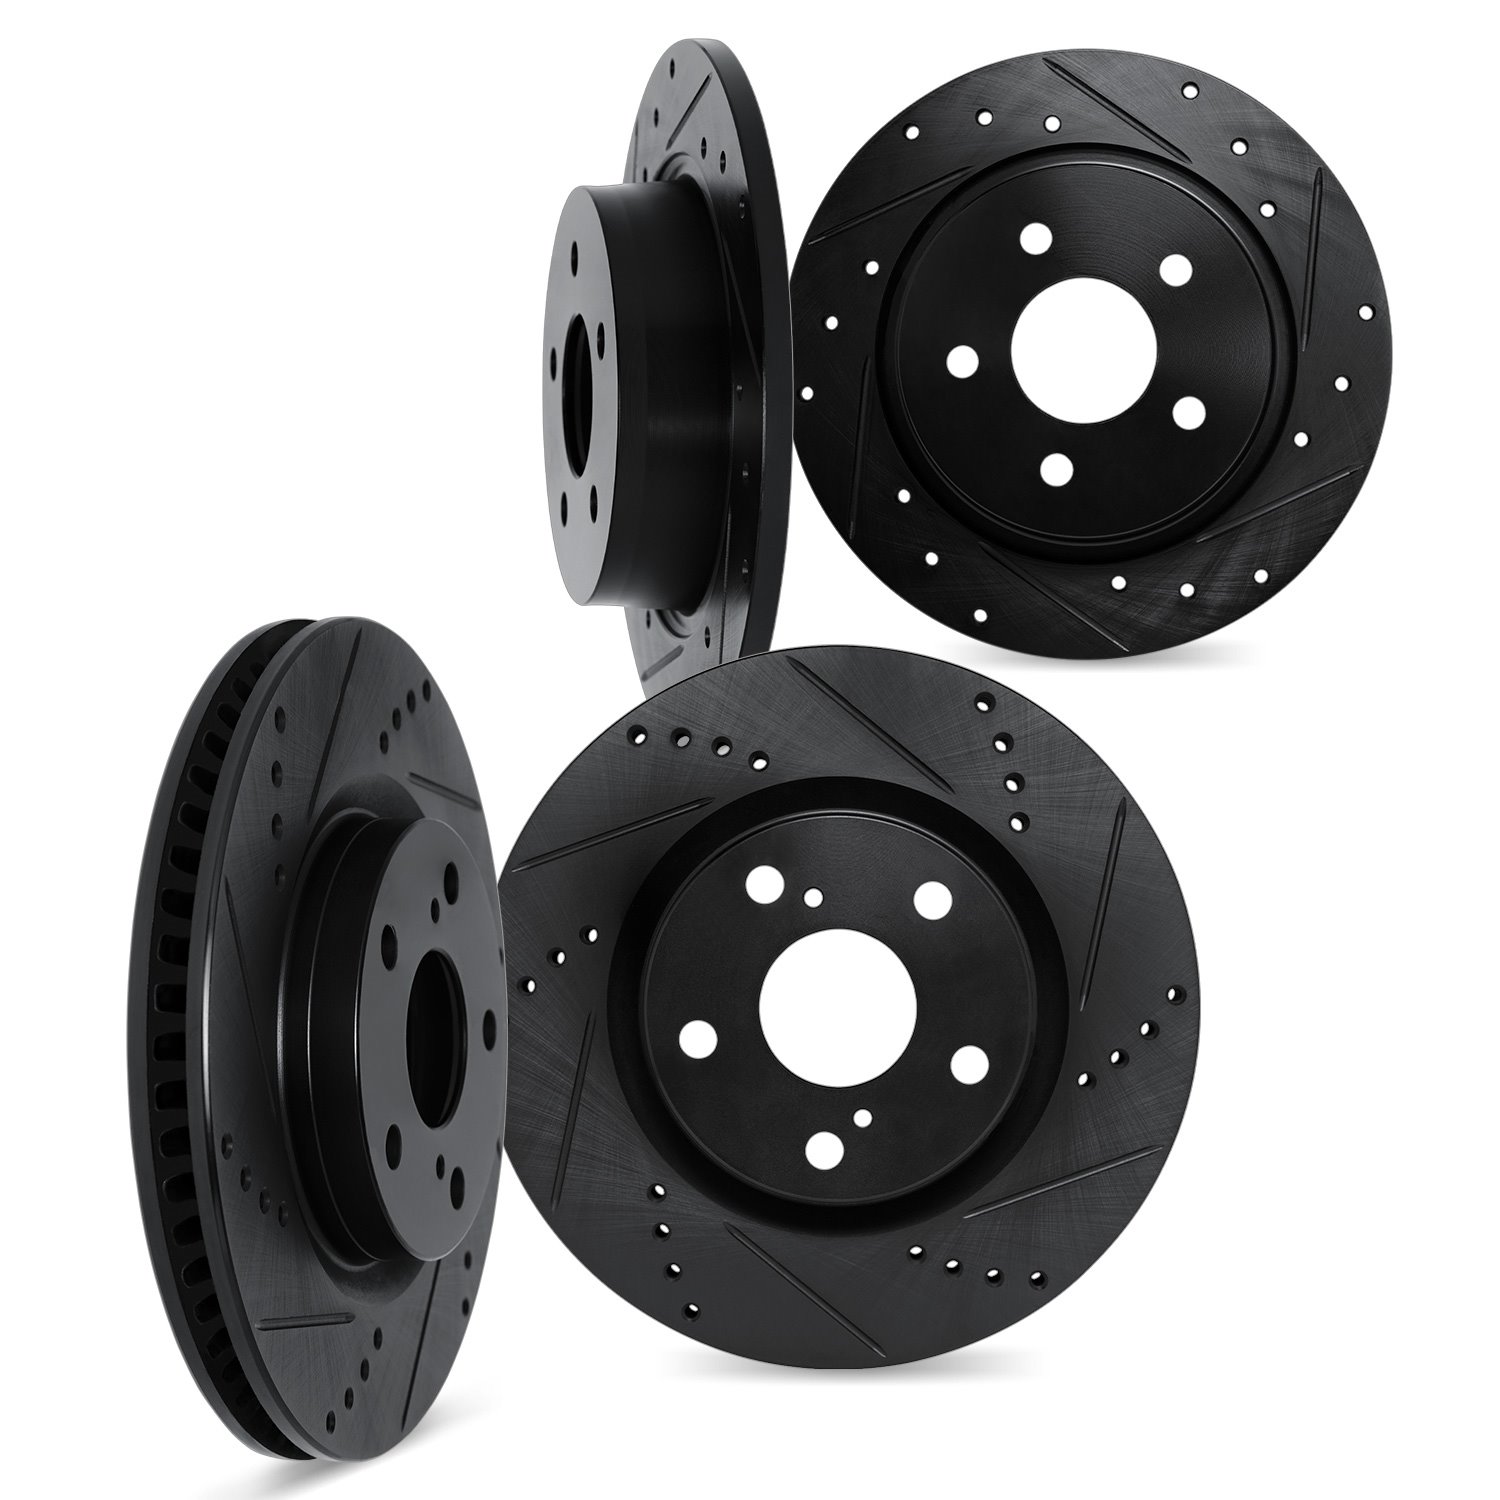 8004-73001 Drilled/Slotted Brake Rotors [Black], 1992-2005 Audi/Volkswagen, Position: Front and Rear